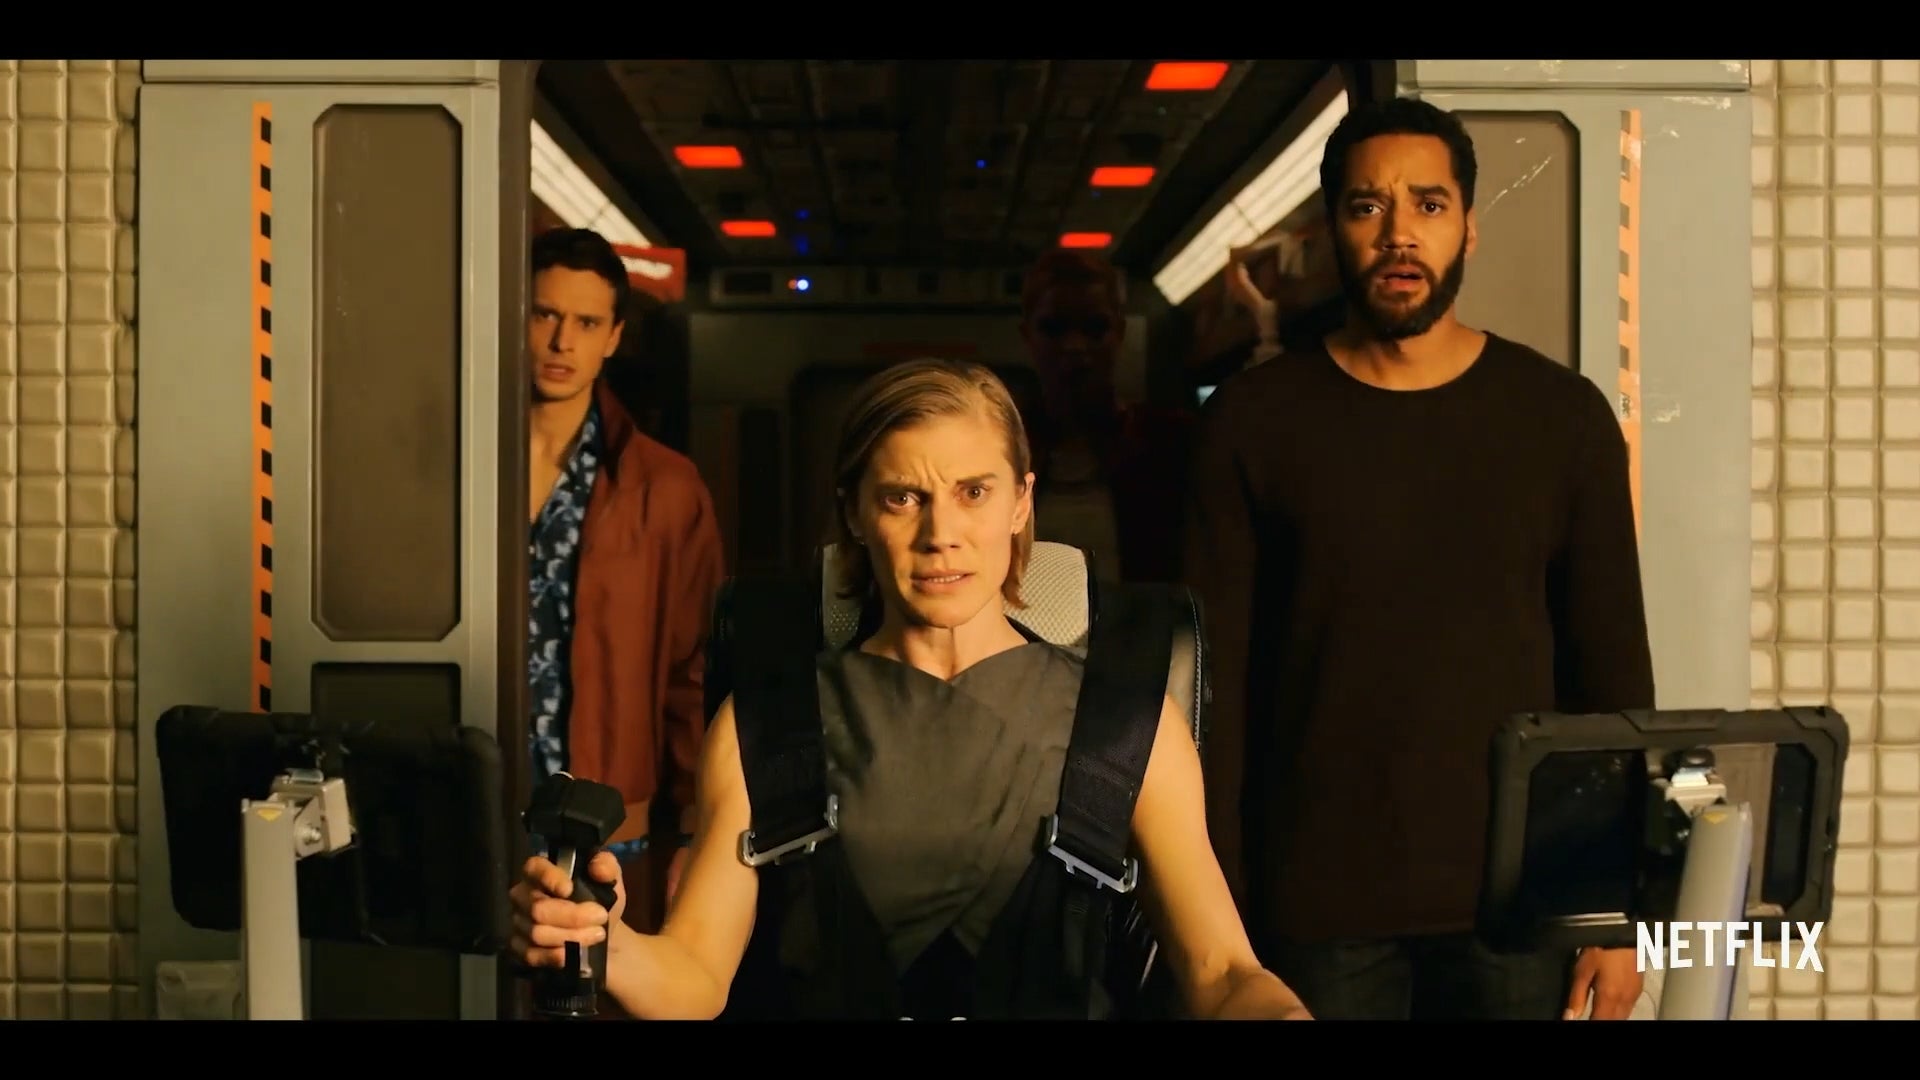 The Netflix series Another life starred Battlestar Gallactica's Katee Sackhoff, but it wasn't enough to help it survive past mediocre critical ratings into 2022. (Image: Netflix)